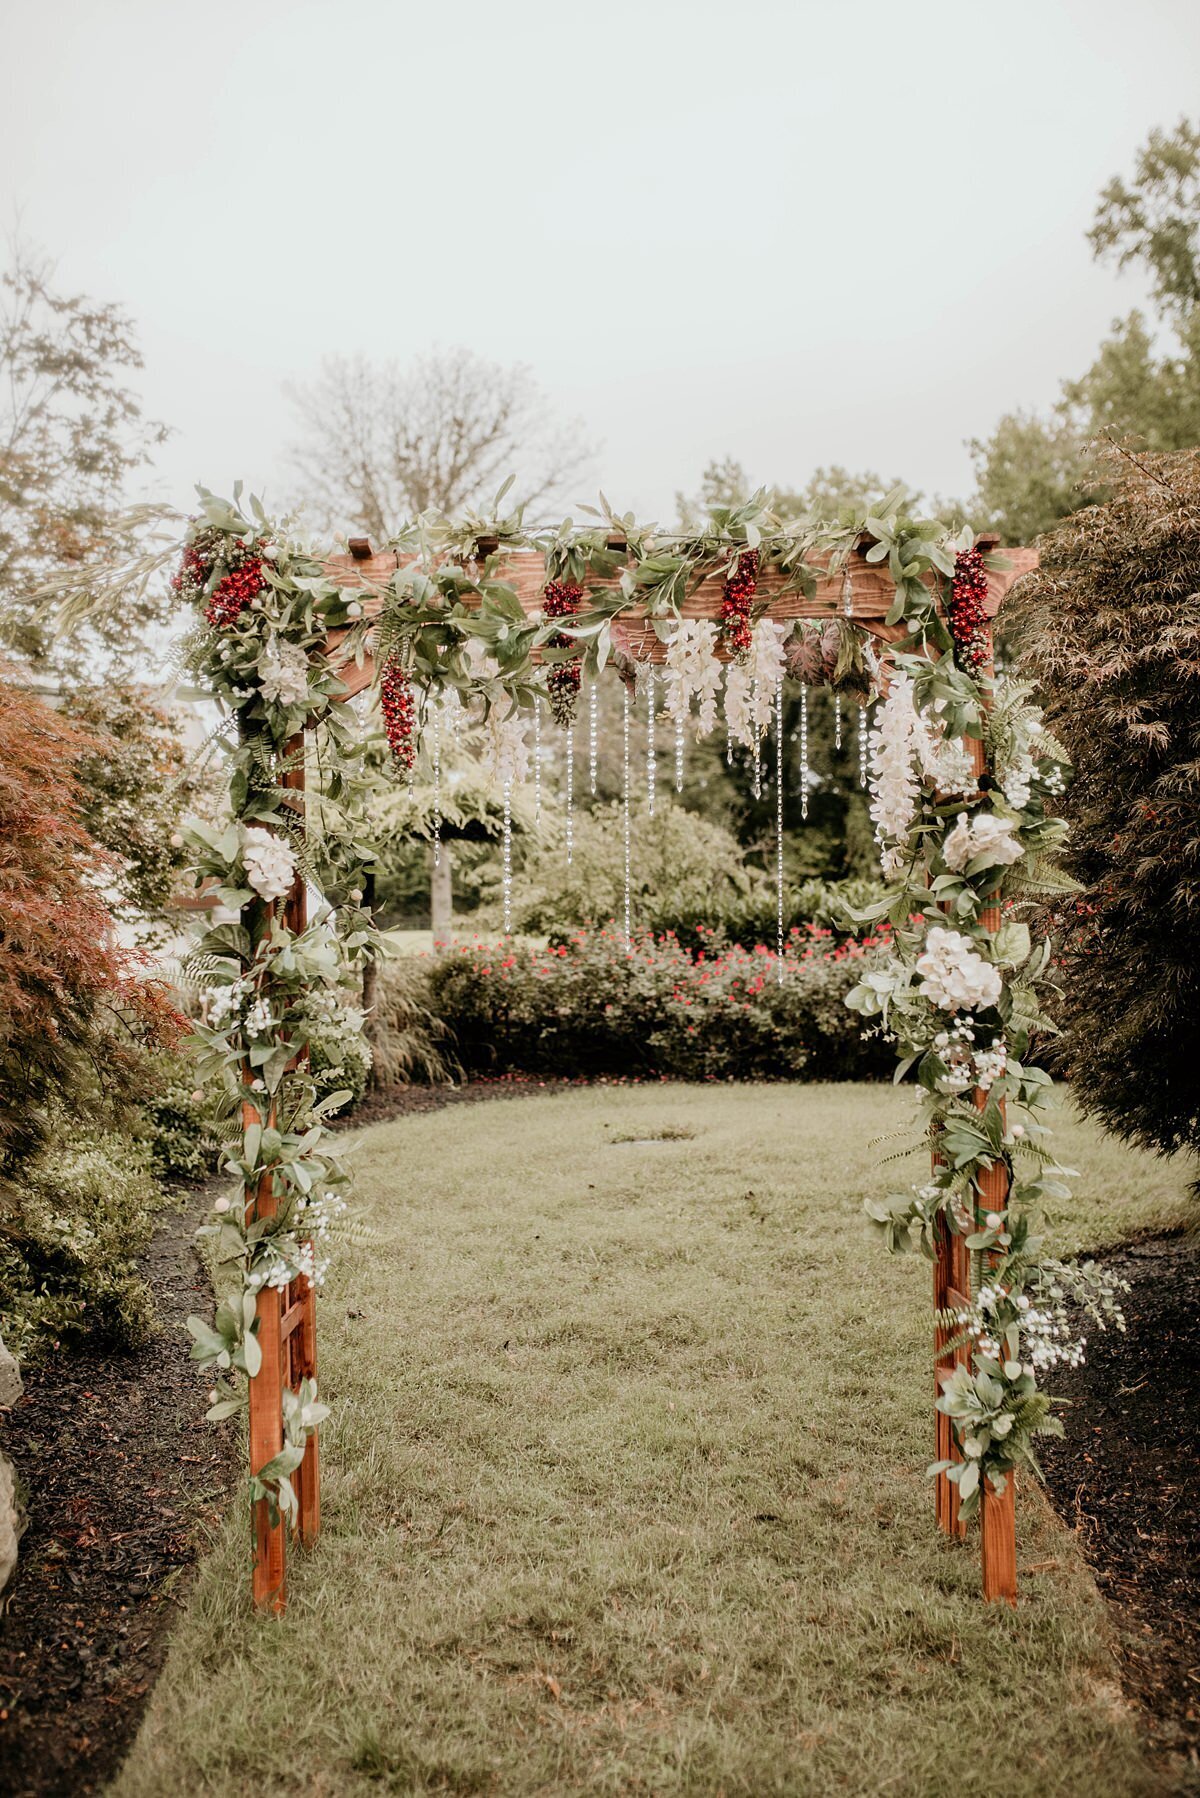 Wooden arbor set in the garden at The Estate at Cherokee Dock wrapped with greenery, hanging white flowers and hanging burgundy flowers accented by a curtain of crystals.